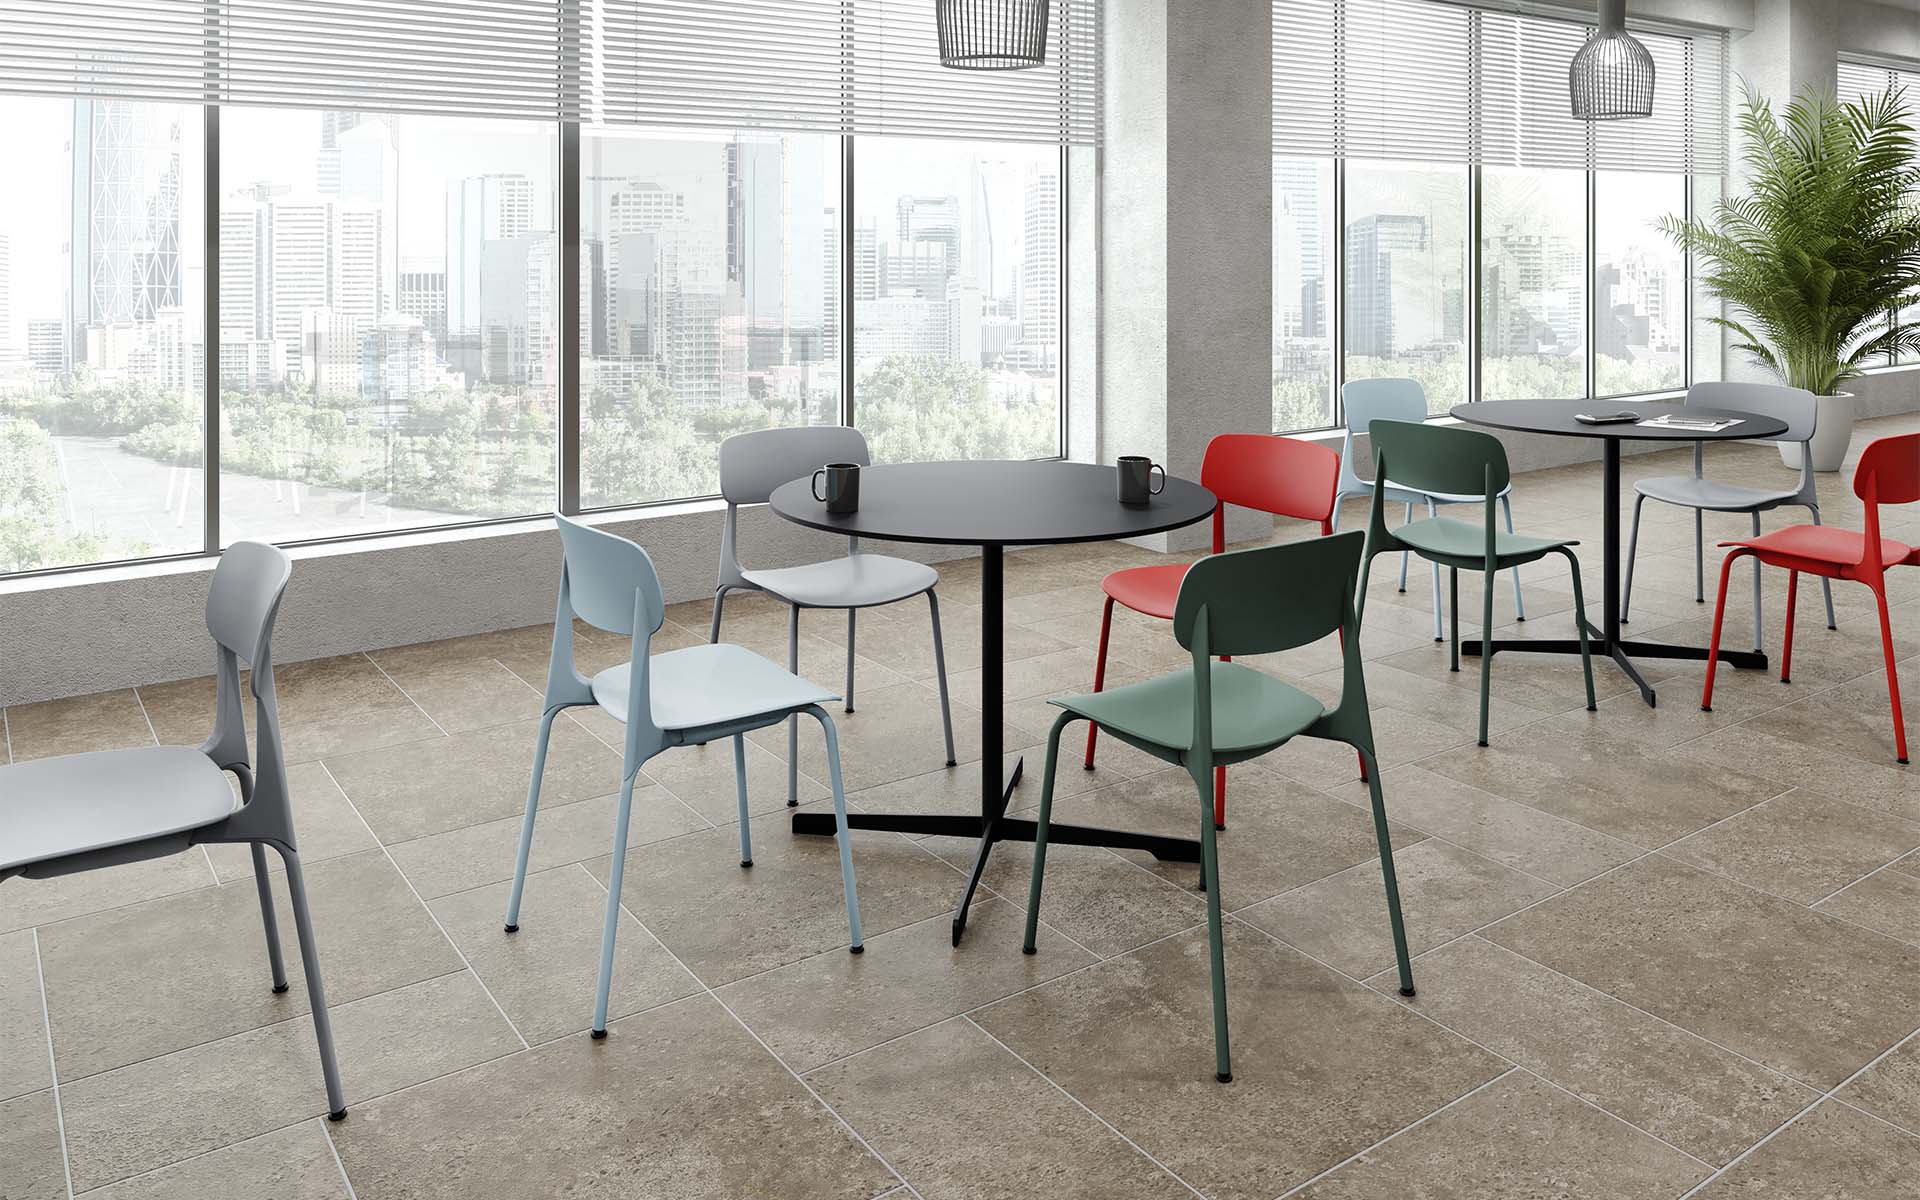 Okamura Ena visitor chairs in orange red, sage, dark grey and dark green around tables in a modern, spacious cafeteria